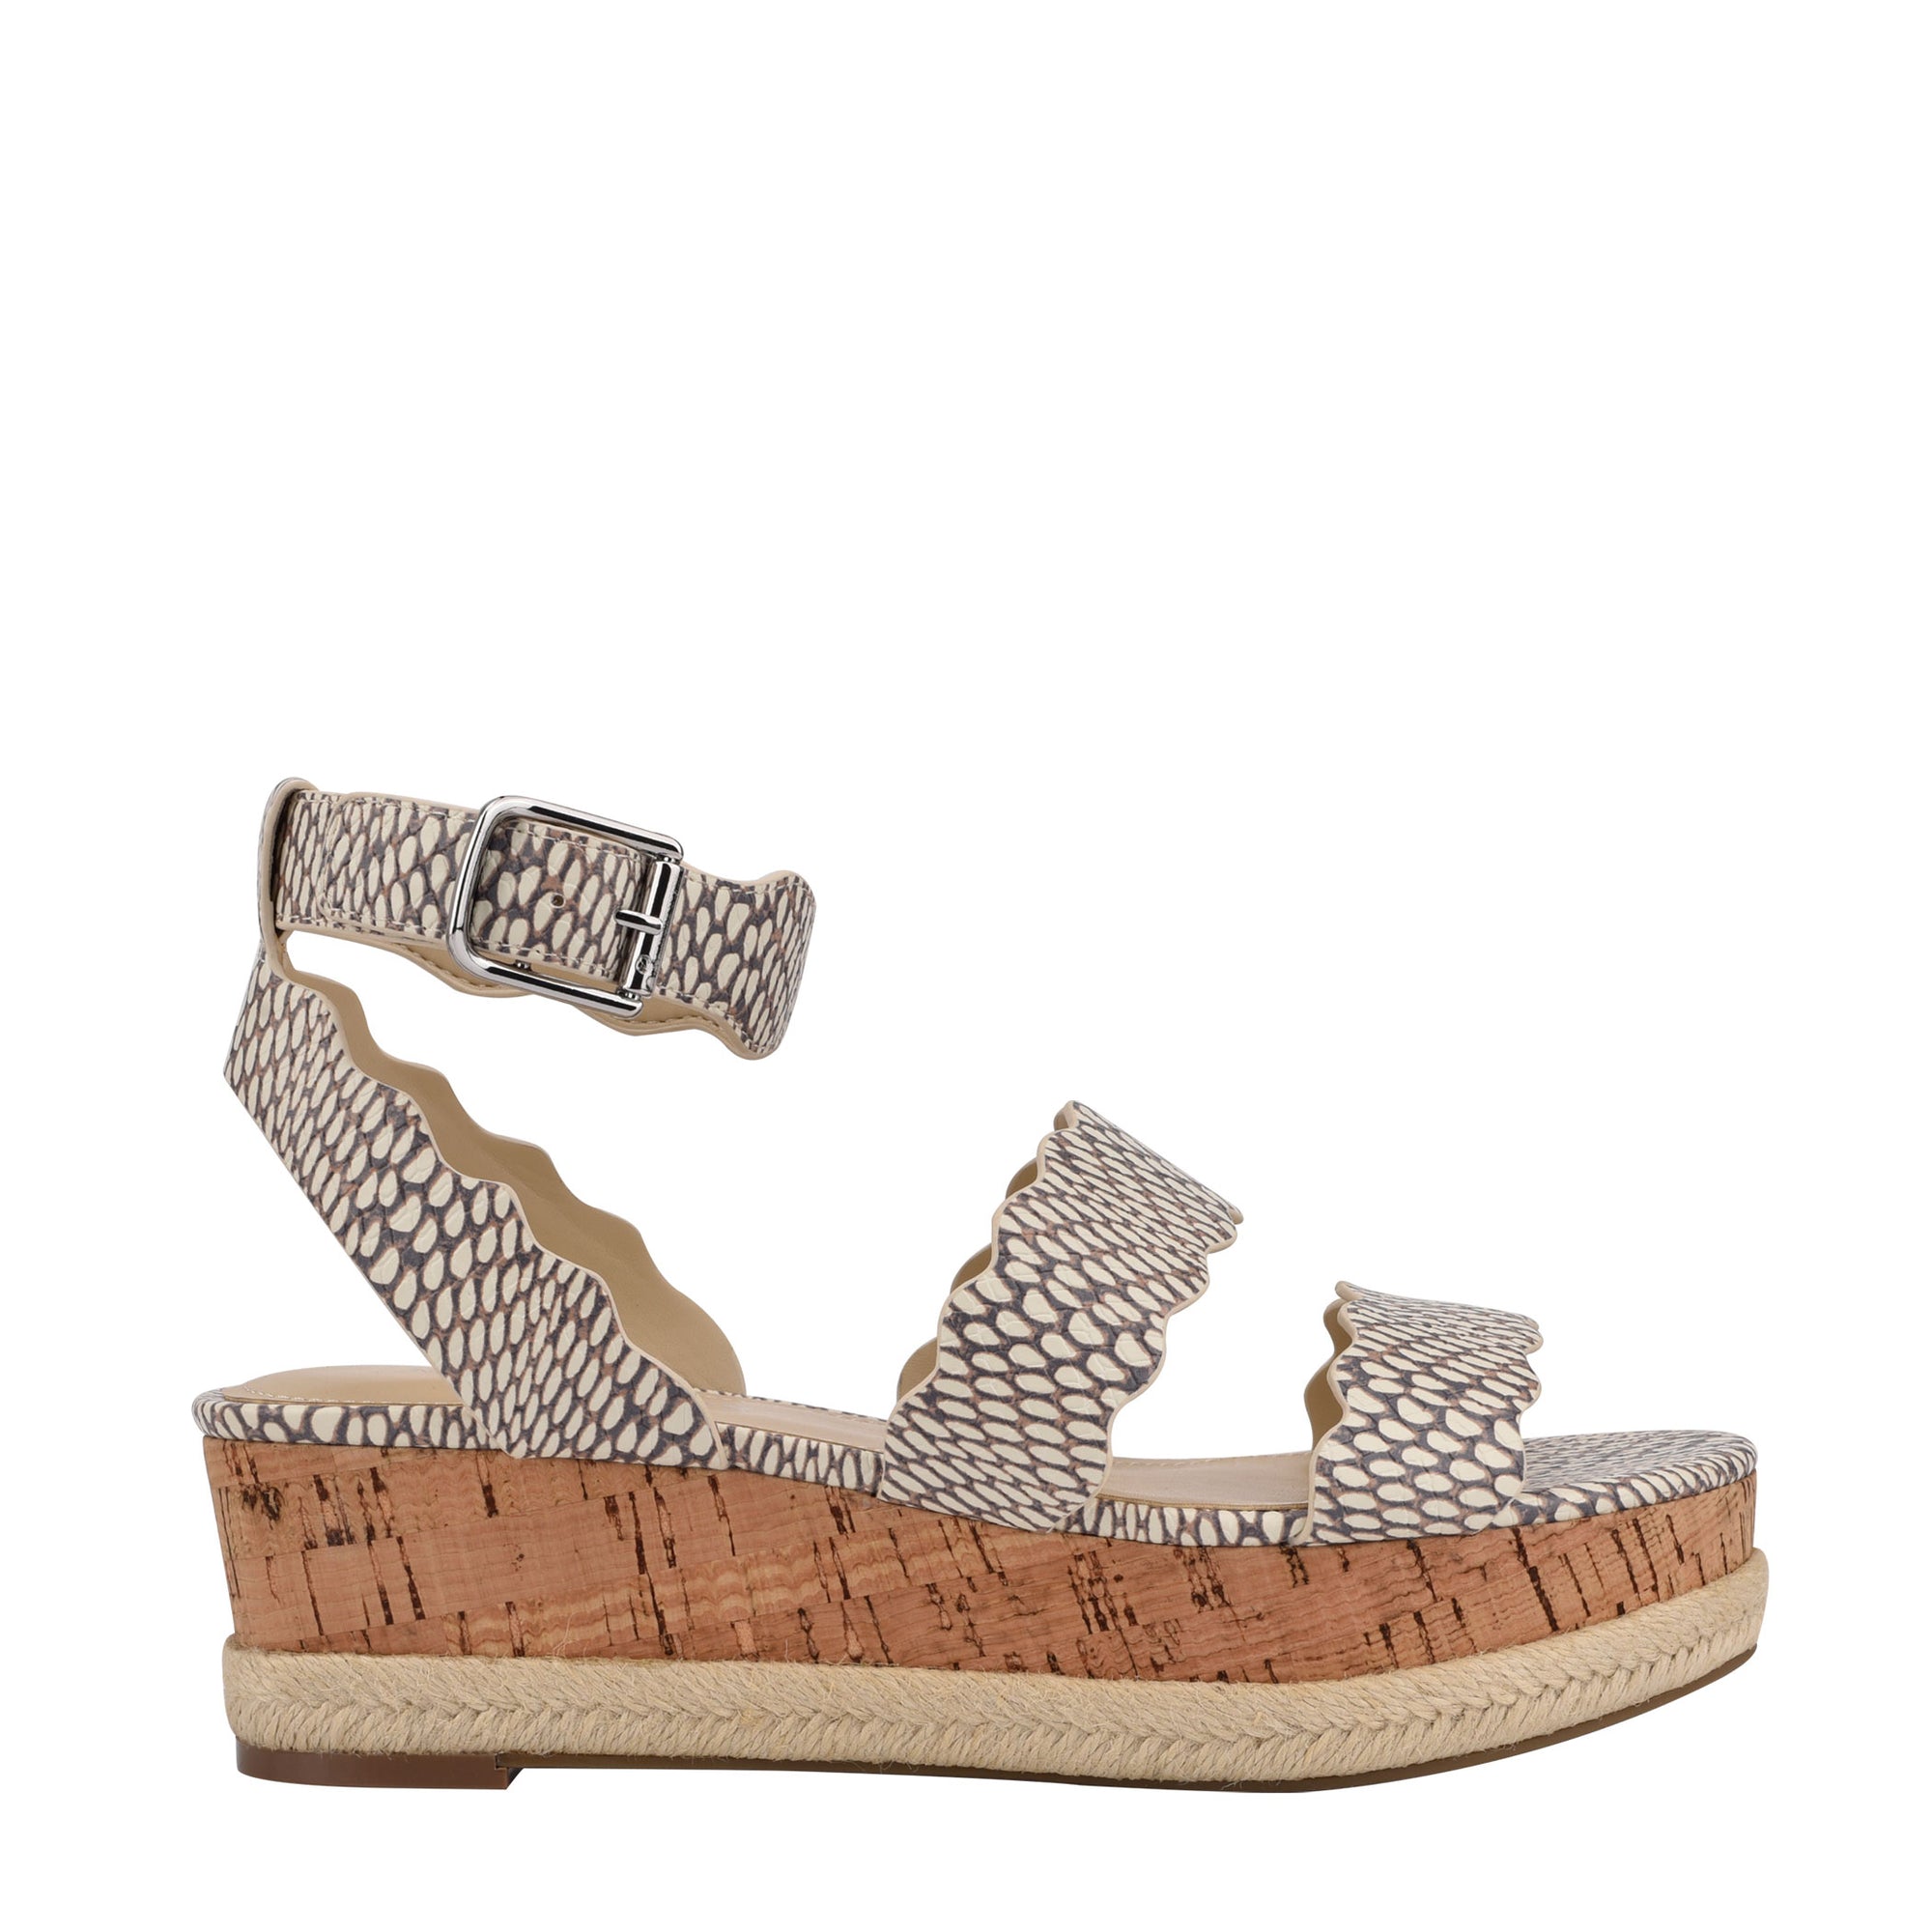 marc fisher scalloped wedges